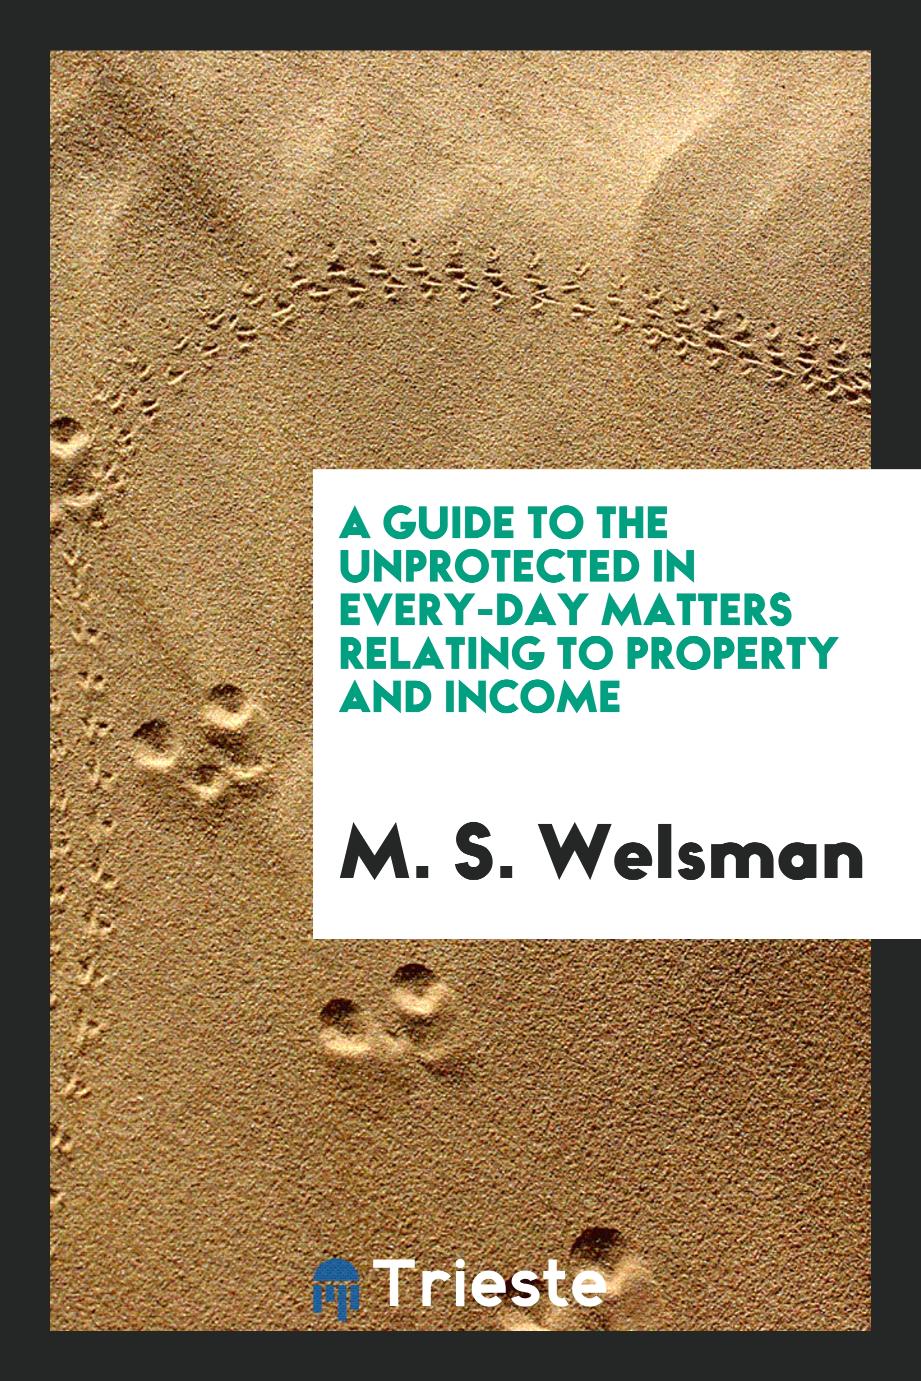 A Guide to the Unprotected in Every-Day Matters Relating to Property and Income